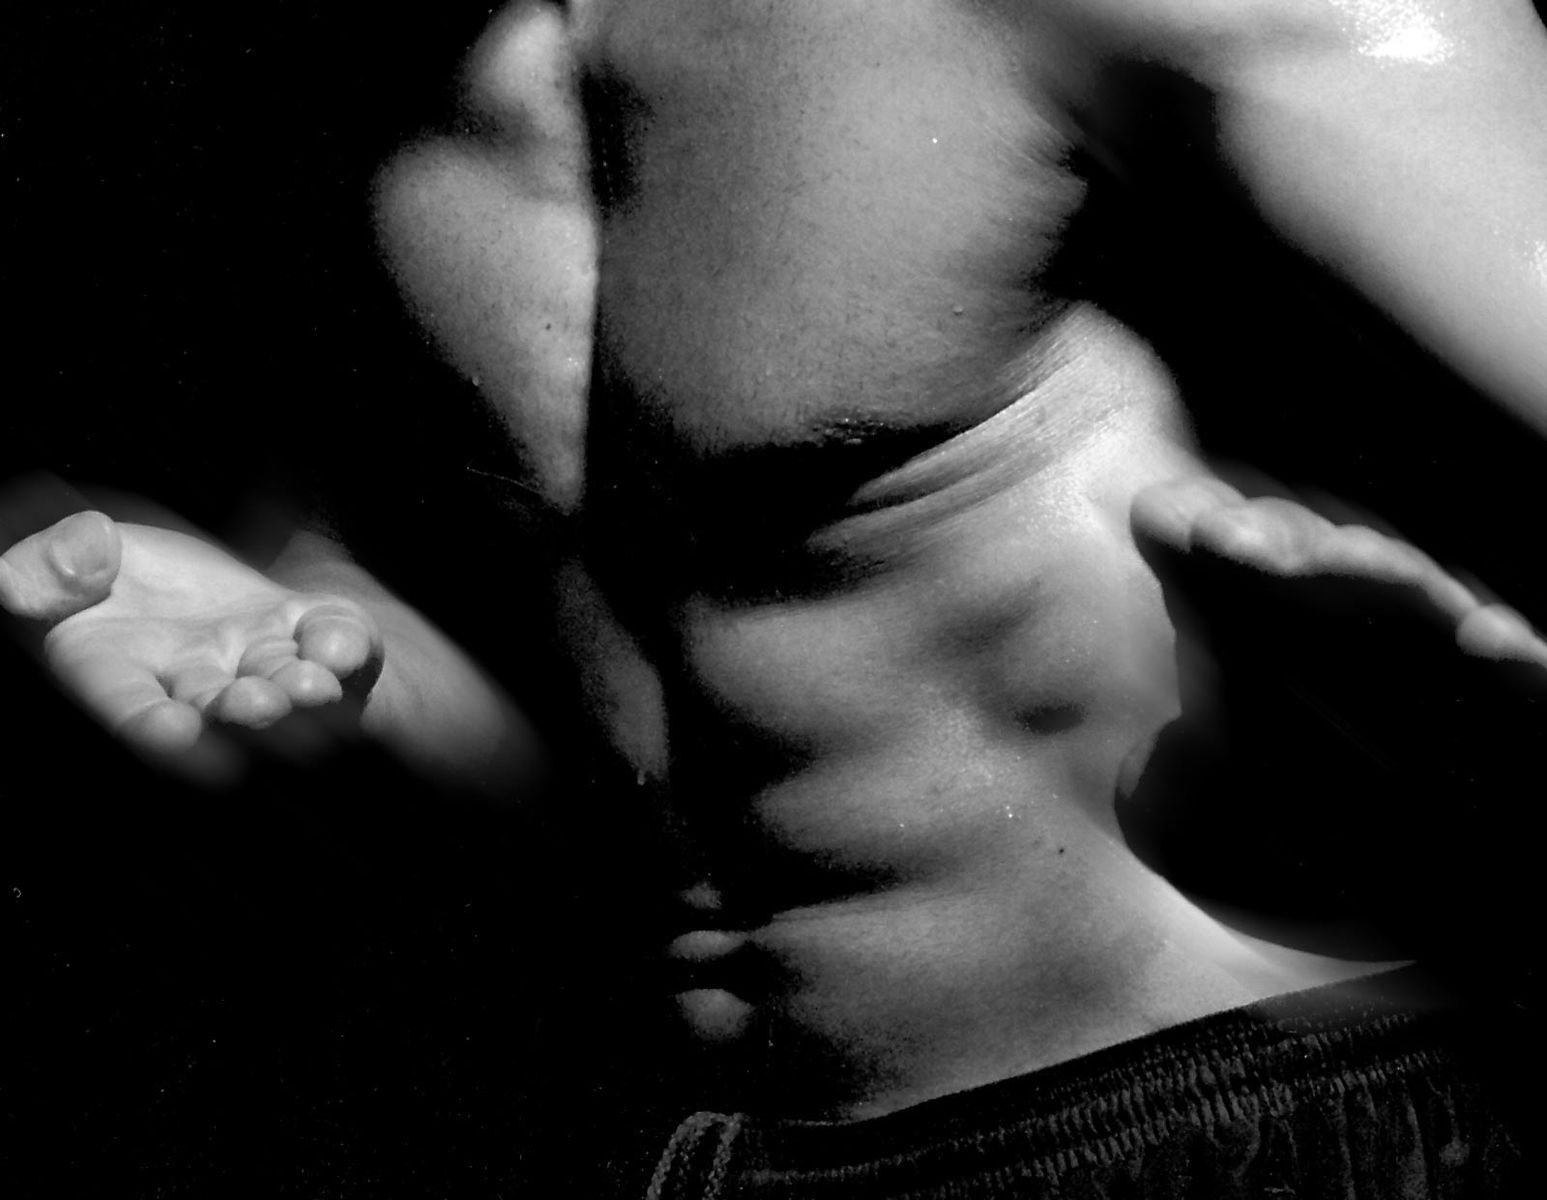 a close up of a man's shirtless body with one hand behind his back